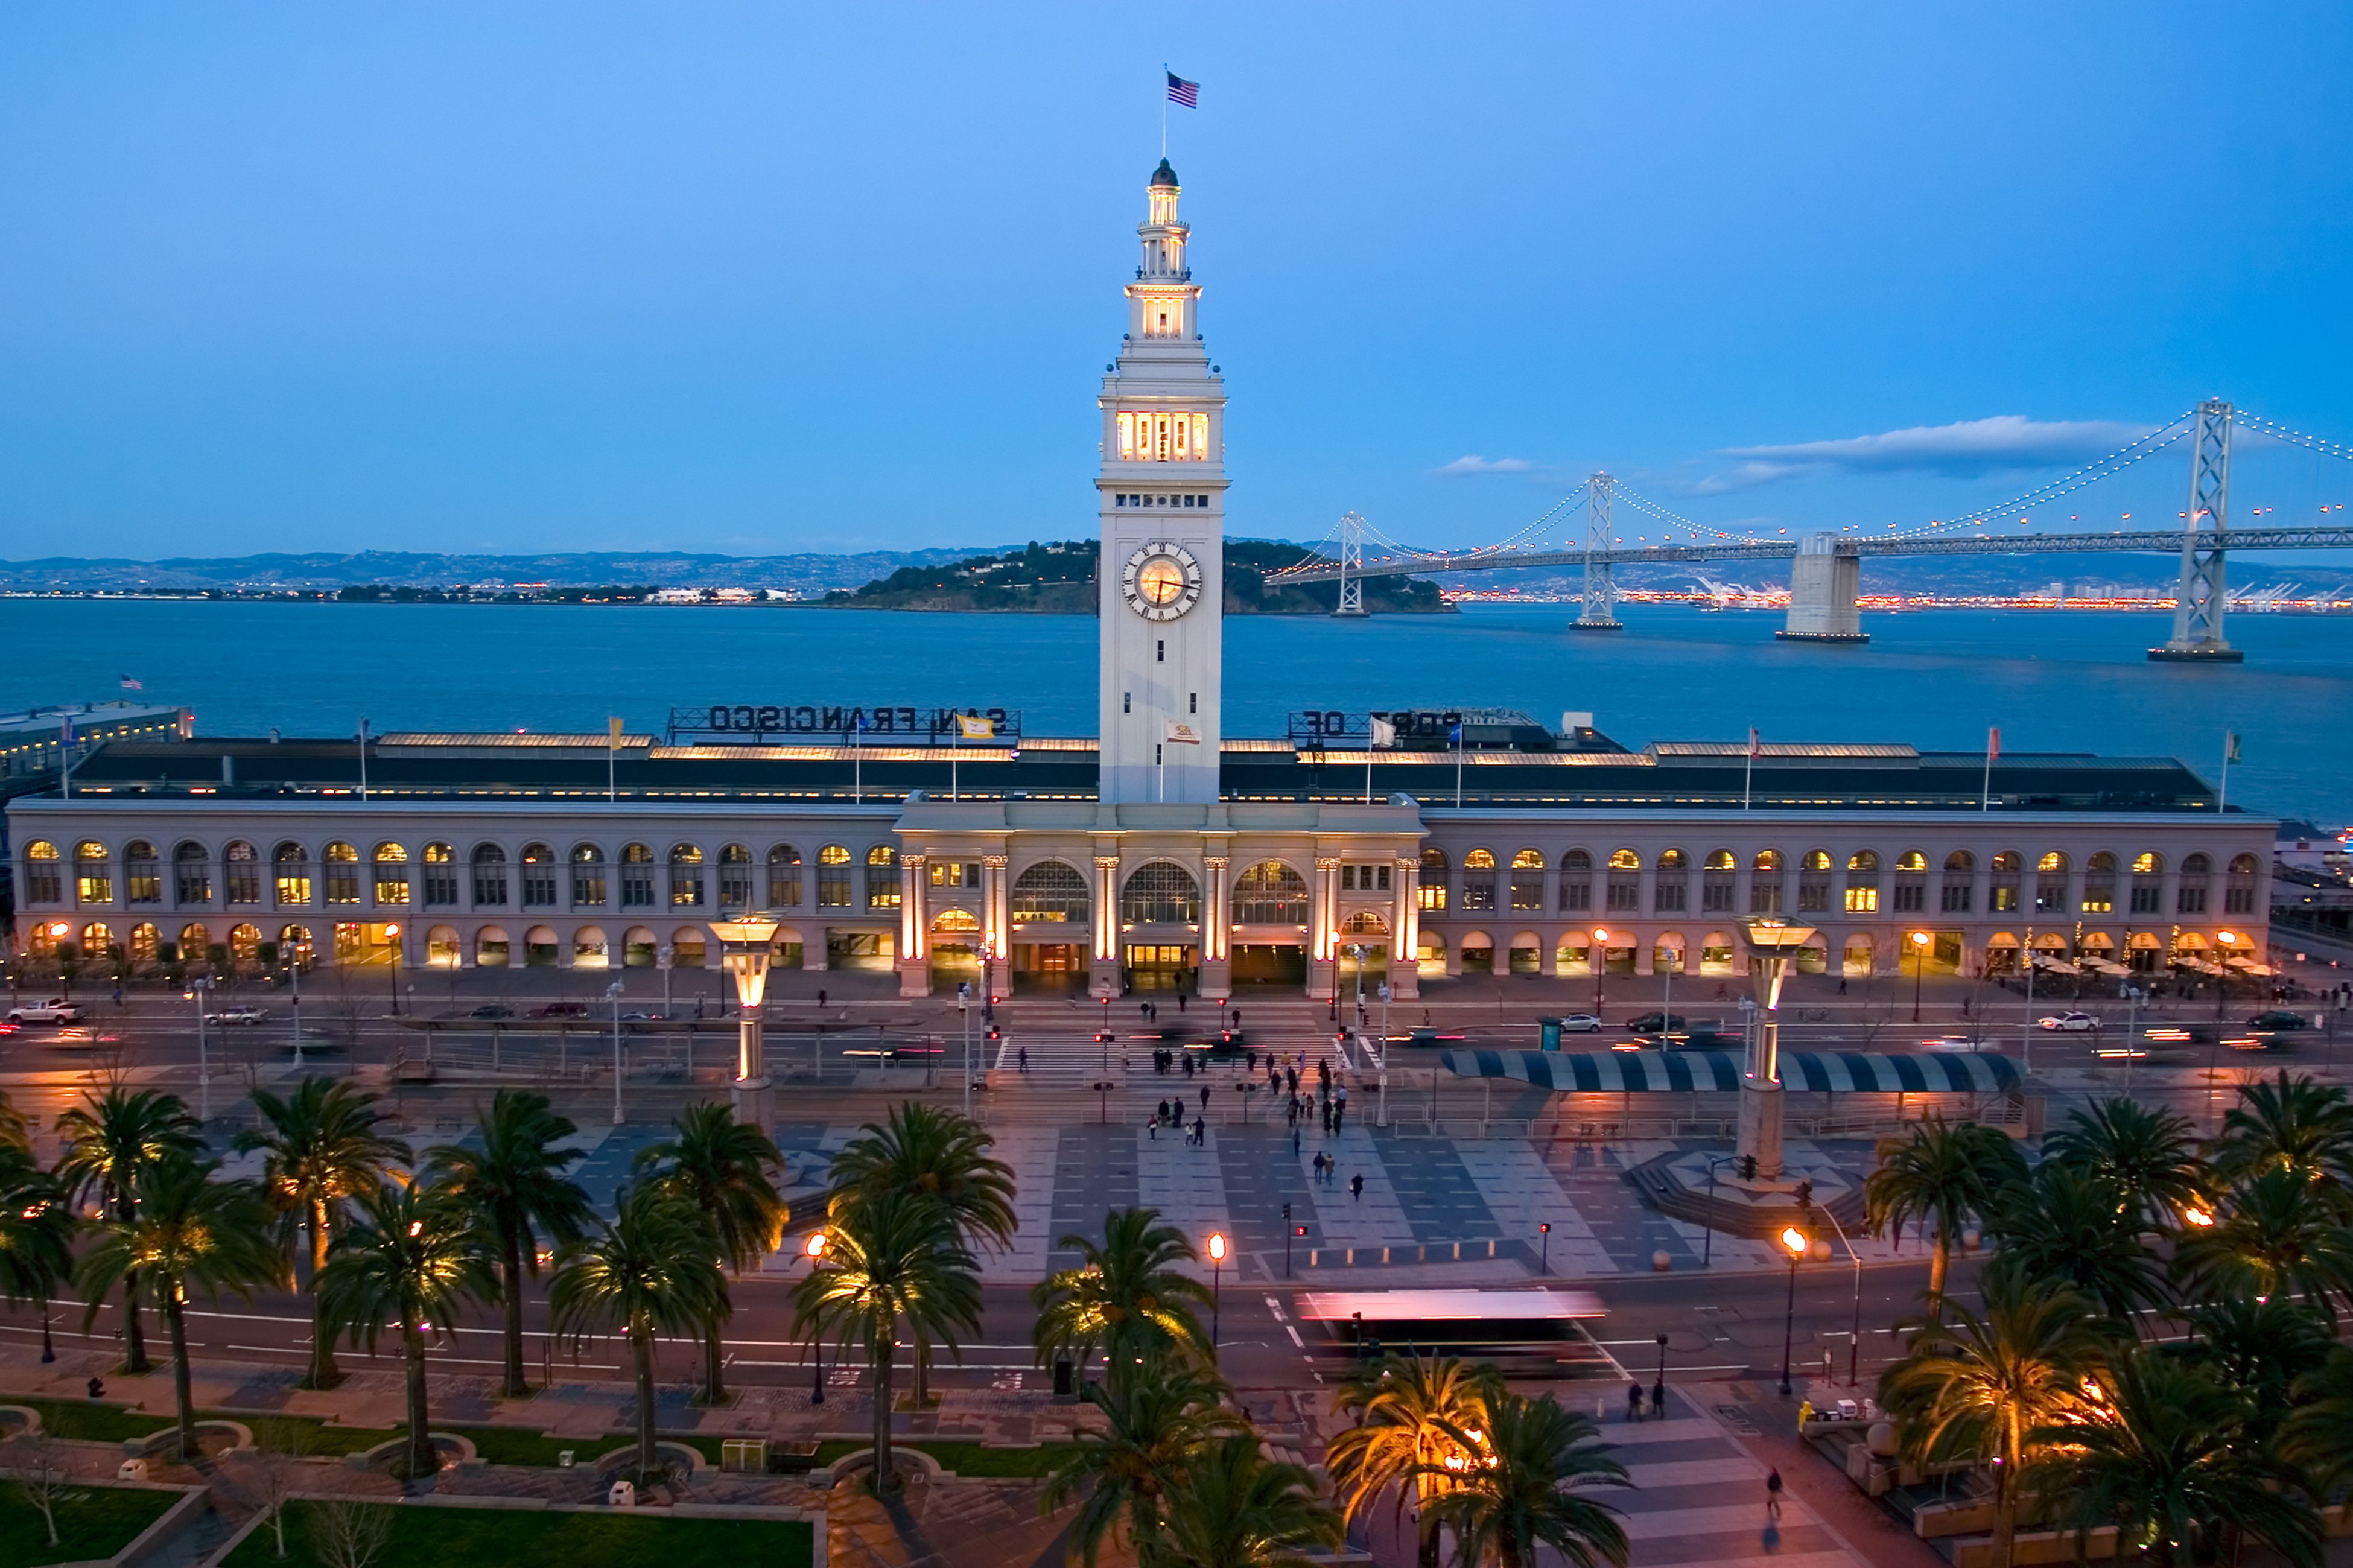 The ferry building offers eclectic gourmet dining and shopping